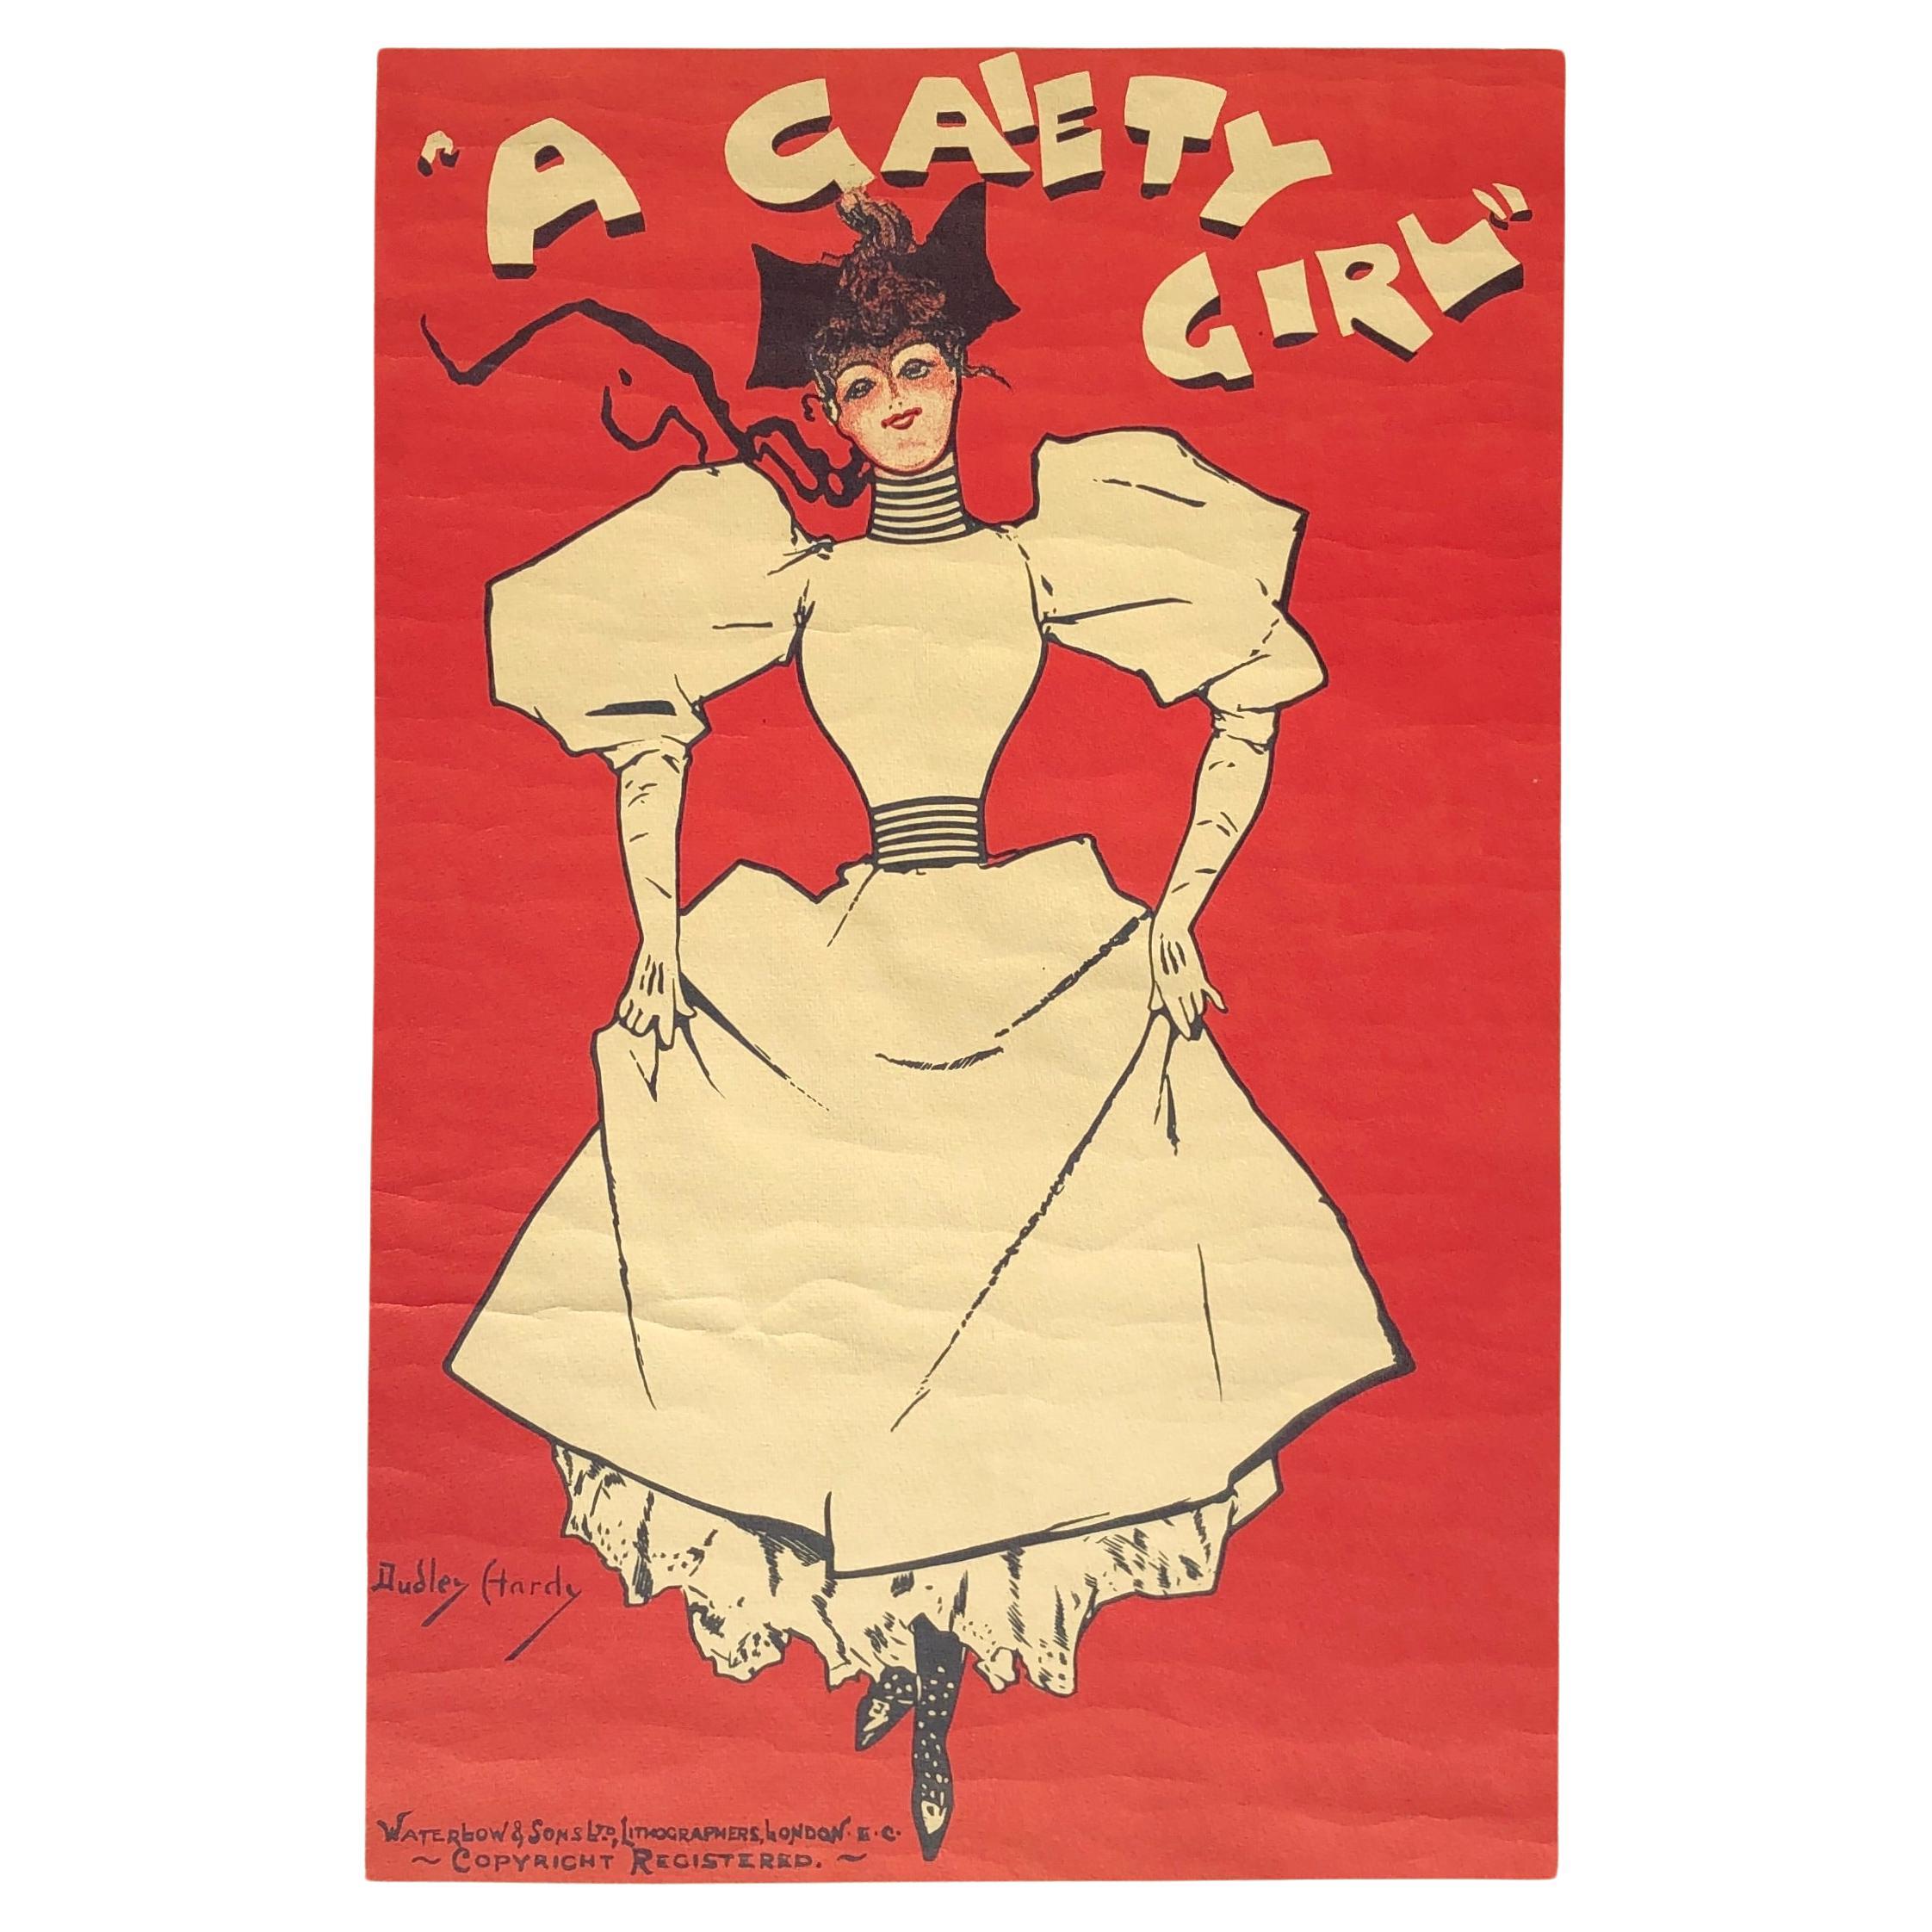 A Gaiety Girl by Dudley Hardy -  Vintage Art Nouveau Lithograph Poster